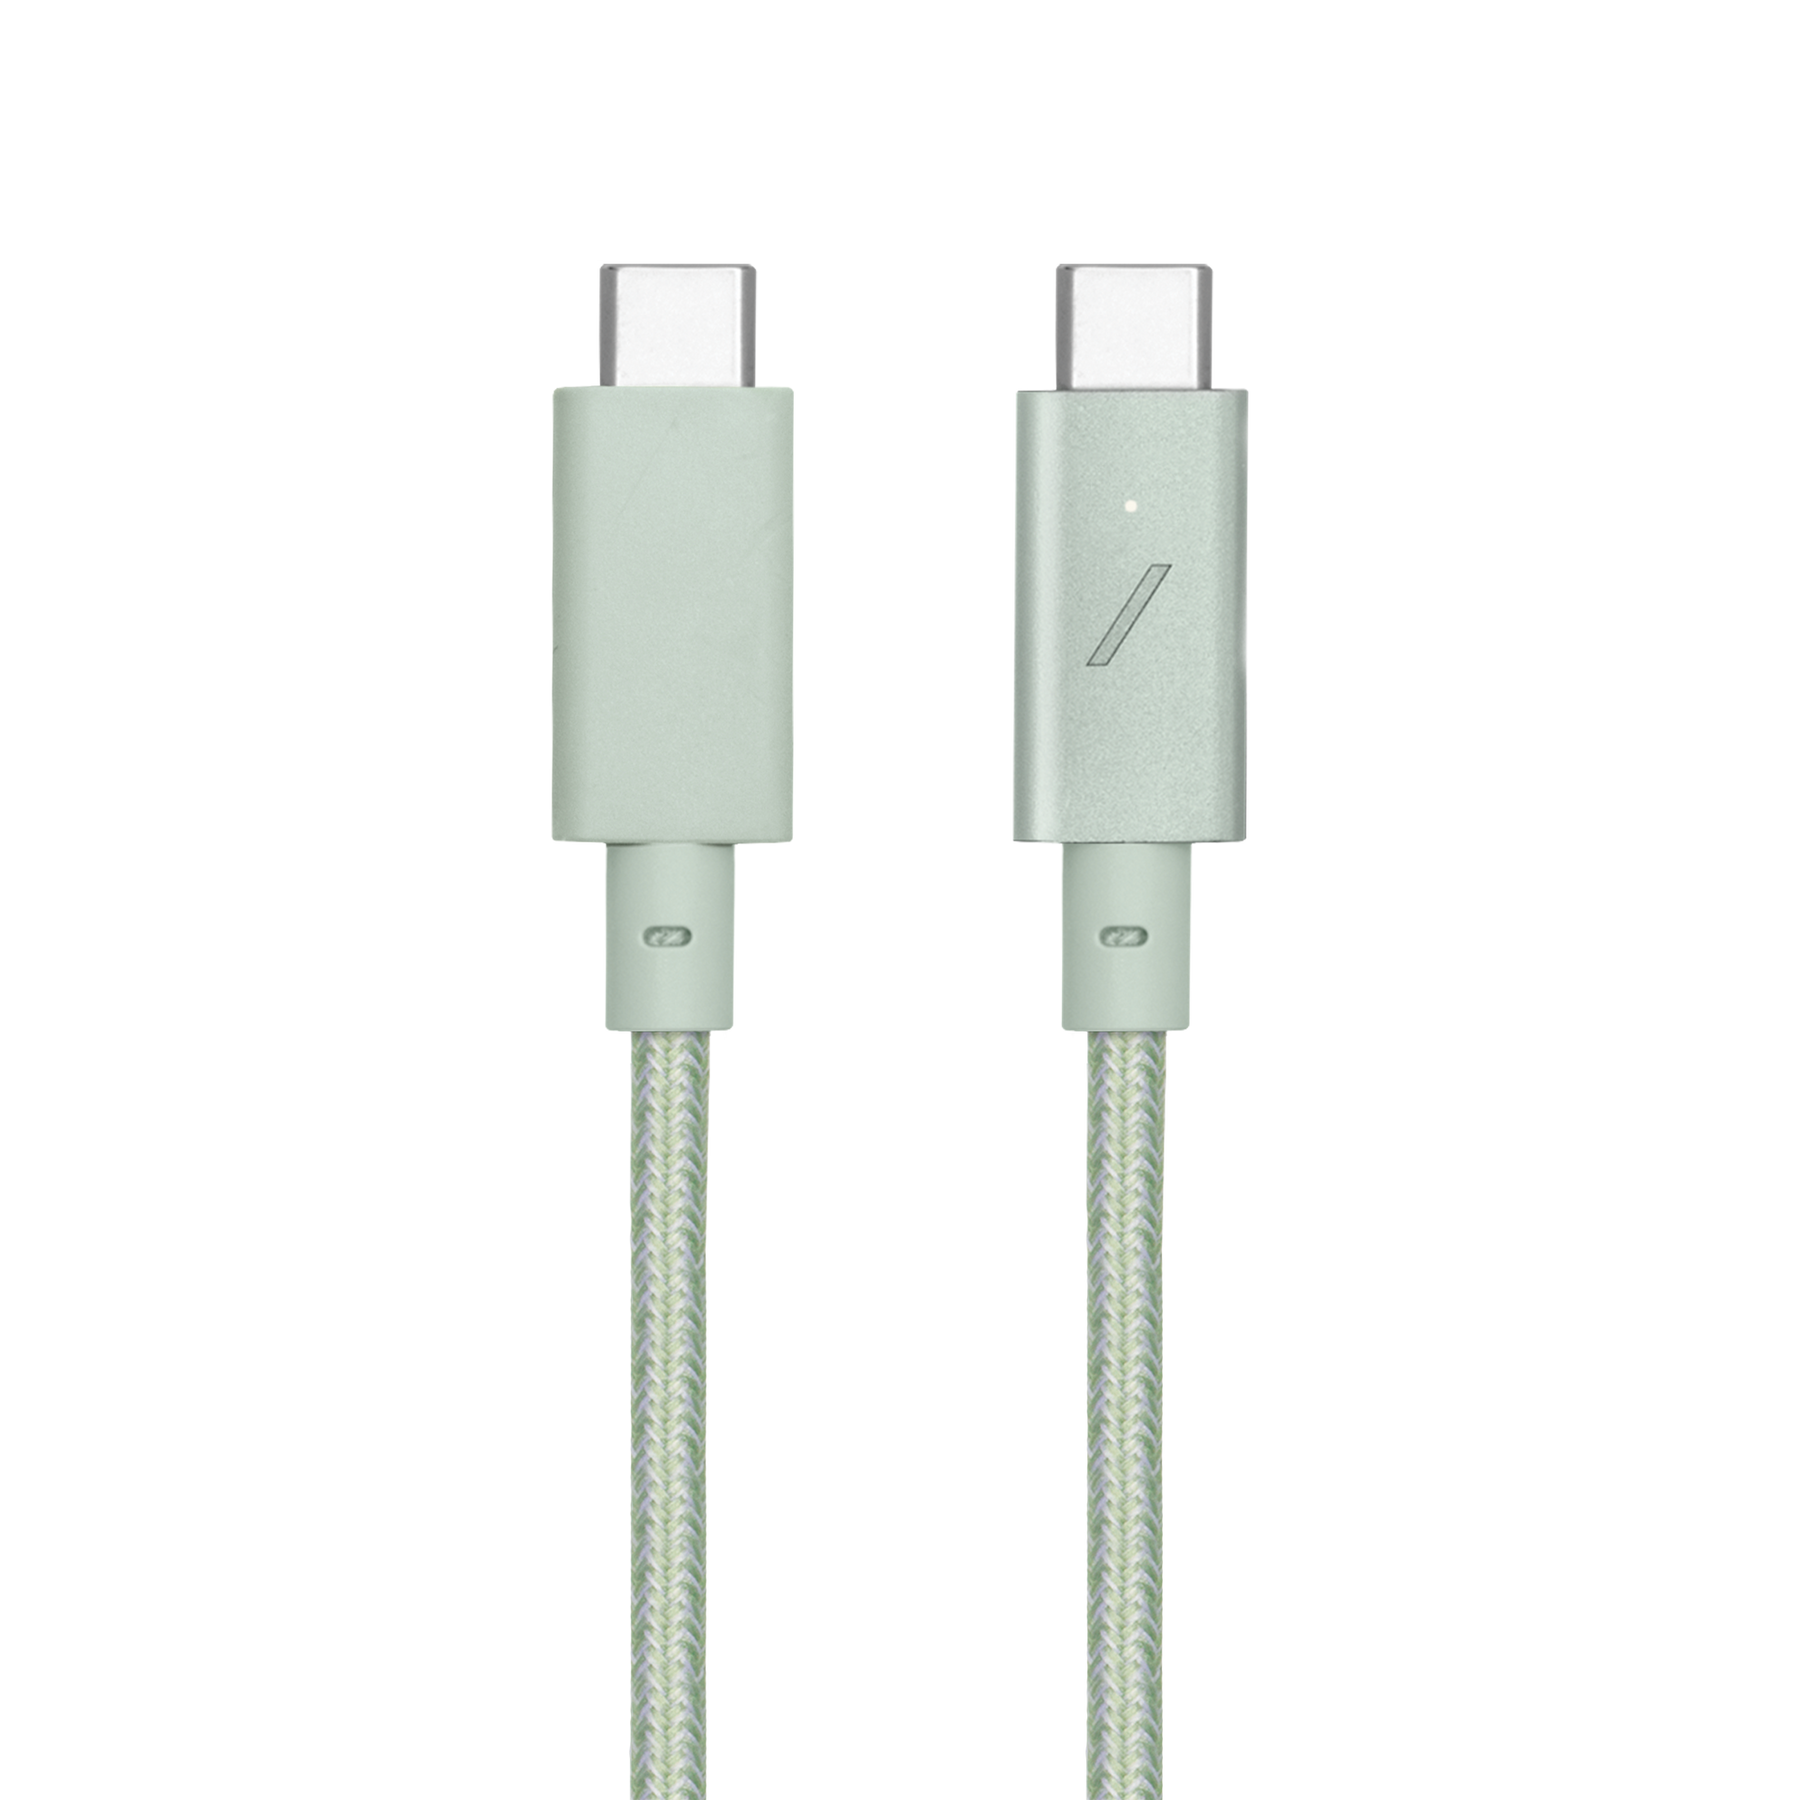 Cable (USB-C to USB-C)